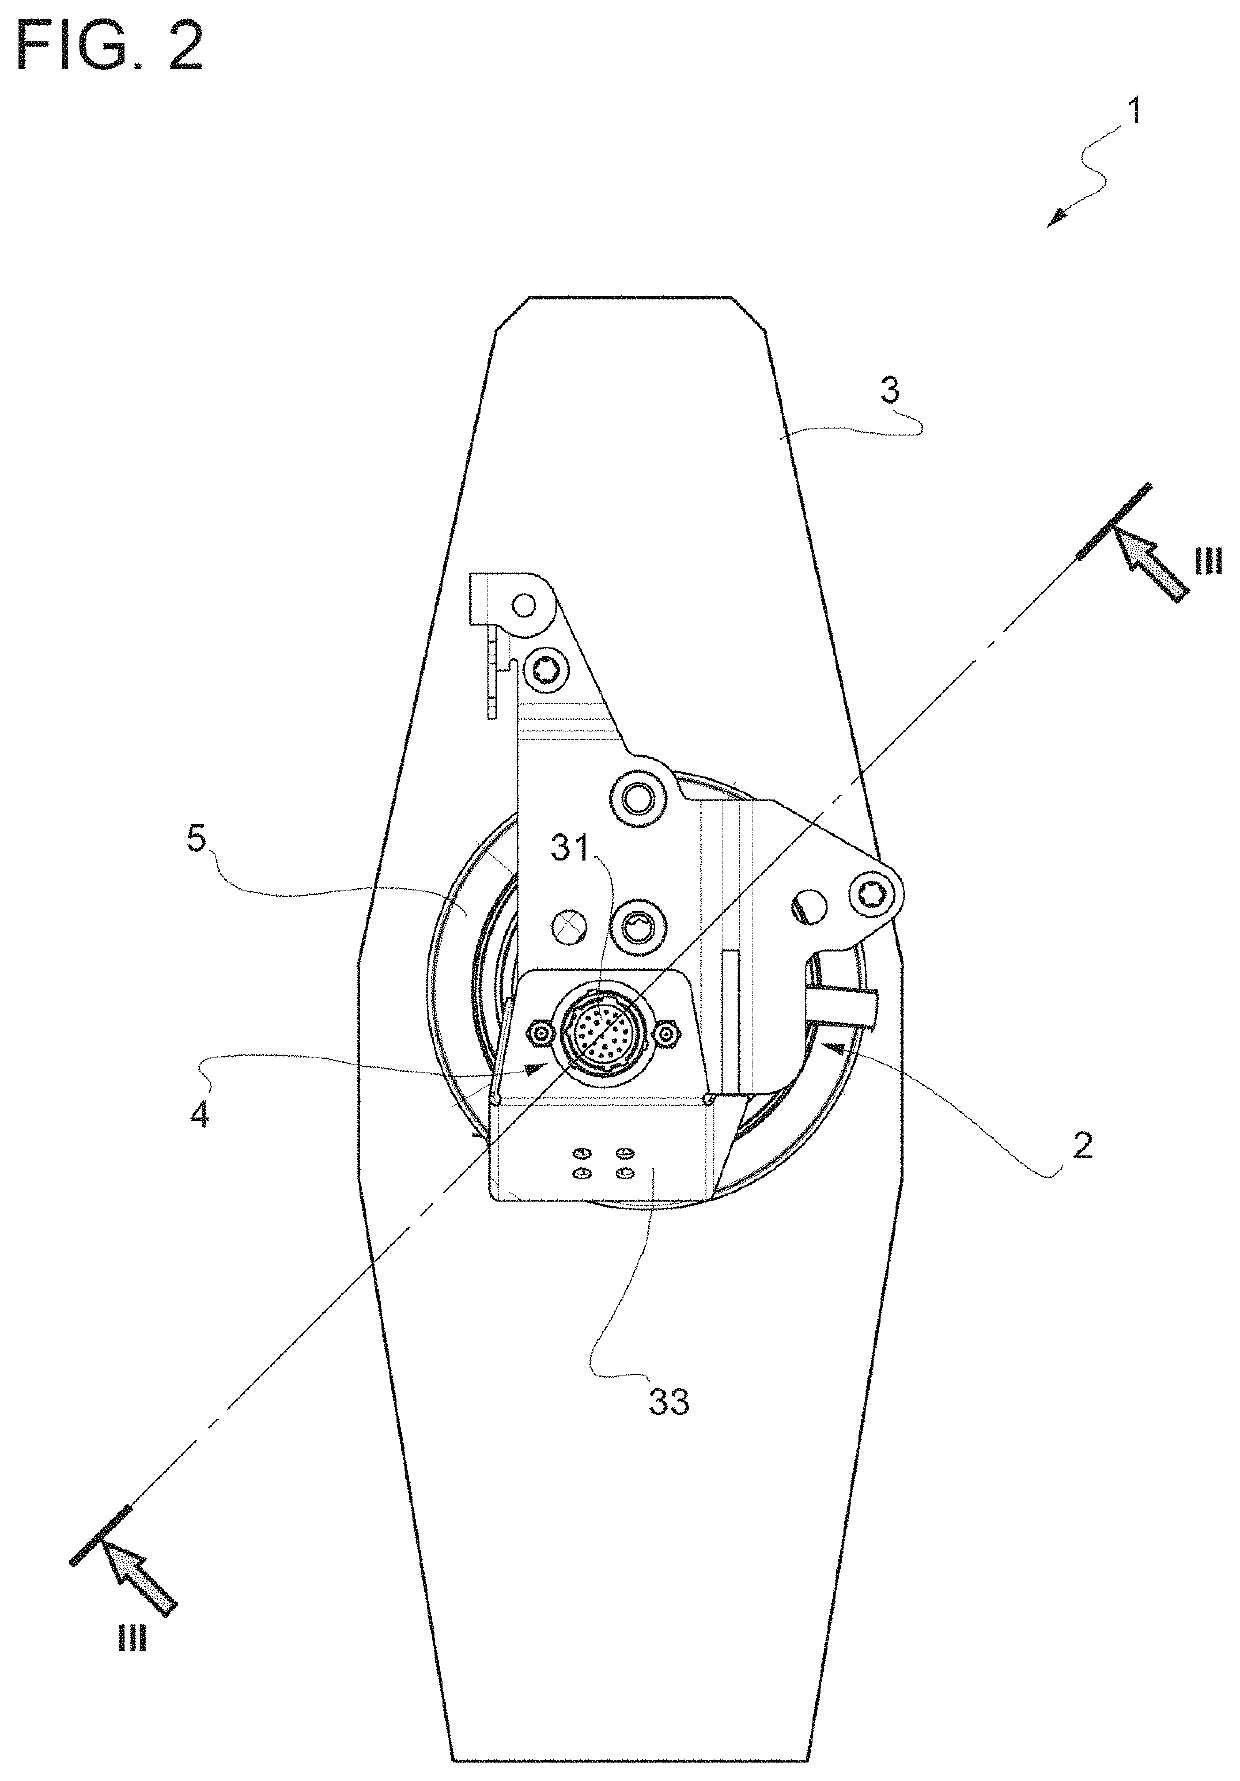 Sensorized suspension assembly for vehicles, including a wheel hub unit and a suspension upright or knuckle, and an associated method and wheel hub unit